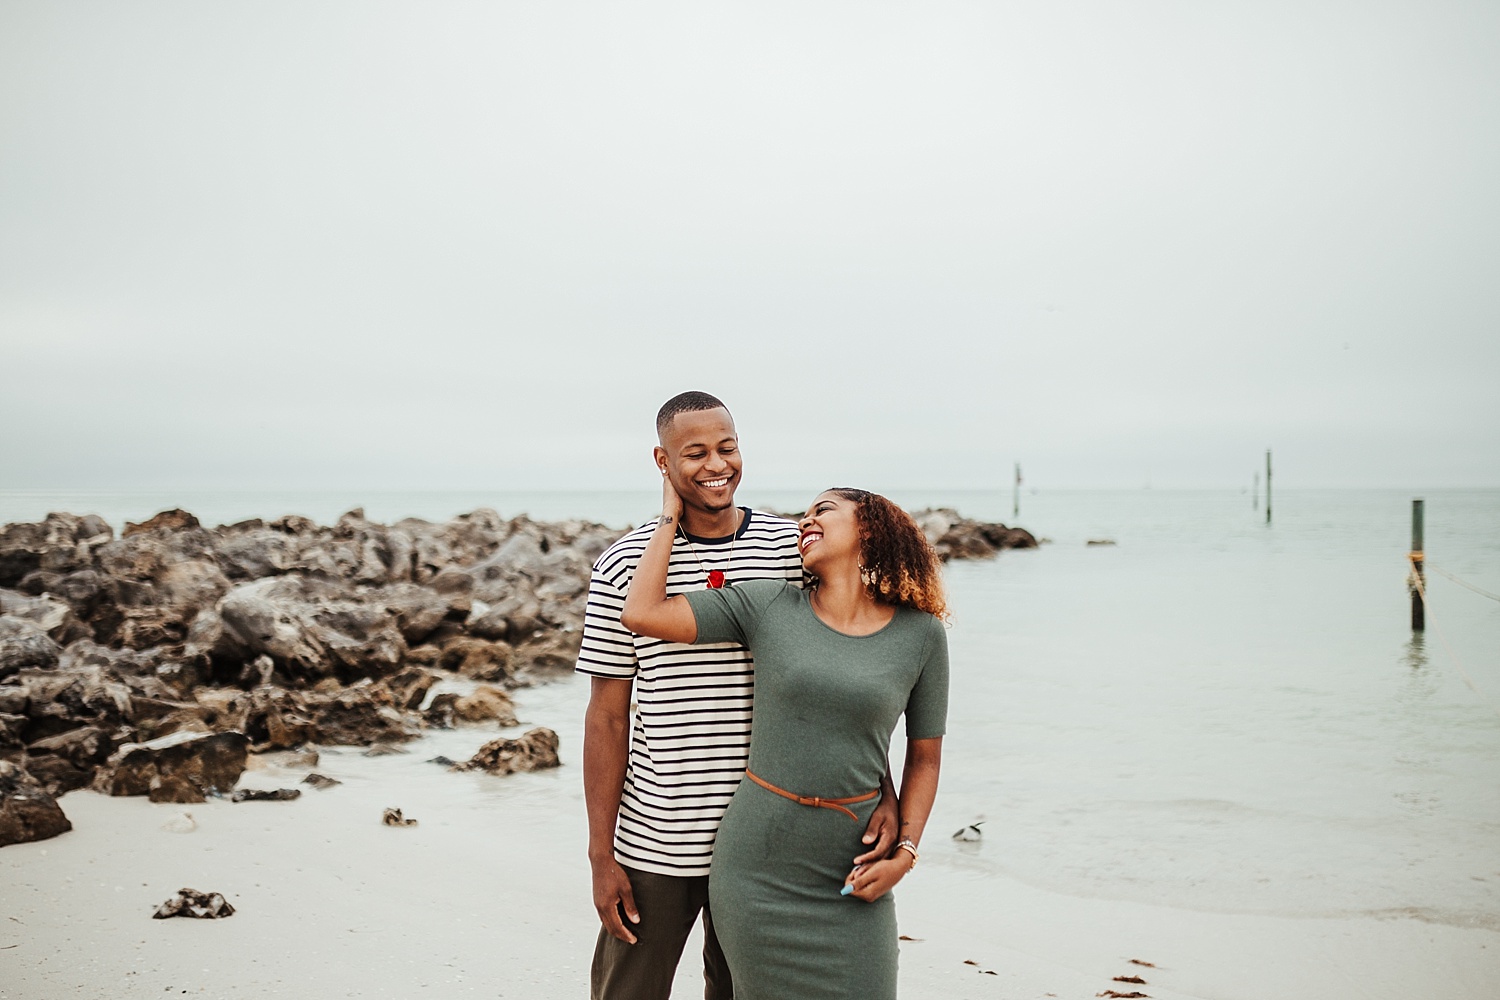 Clearwater Beach Couples Session, Clearwater Beach Engagement Photos, Clearwater Beach Engagement Photo Ideas, Ashley Izquierdo, Clearwater Beach, Tampa Wedding Photographers, Tampa Wedding Photographer, Tampa Engagement Photos, Tampa Photographer, Best Tampa Photographers 